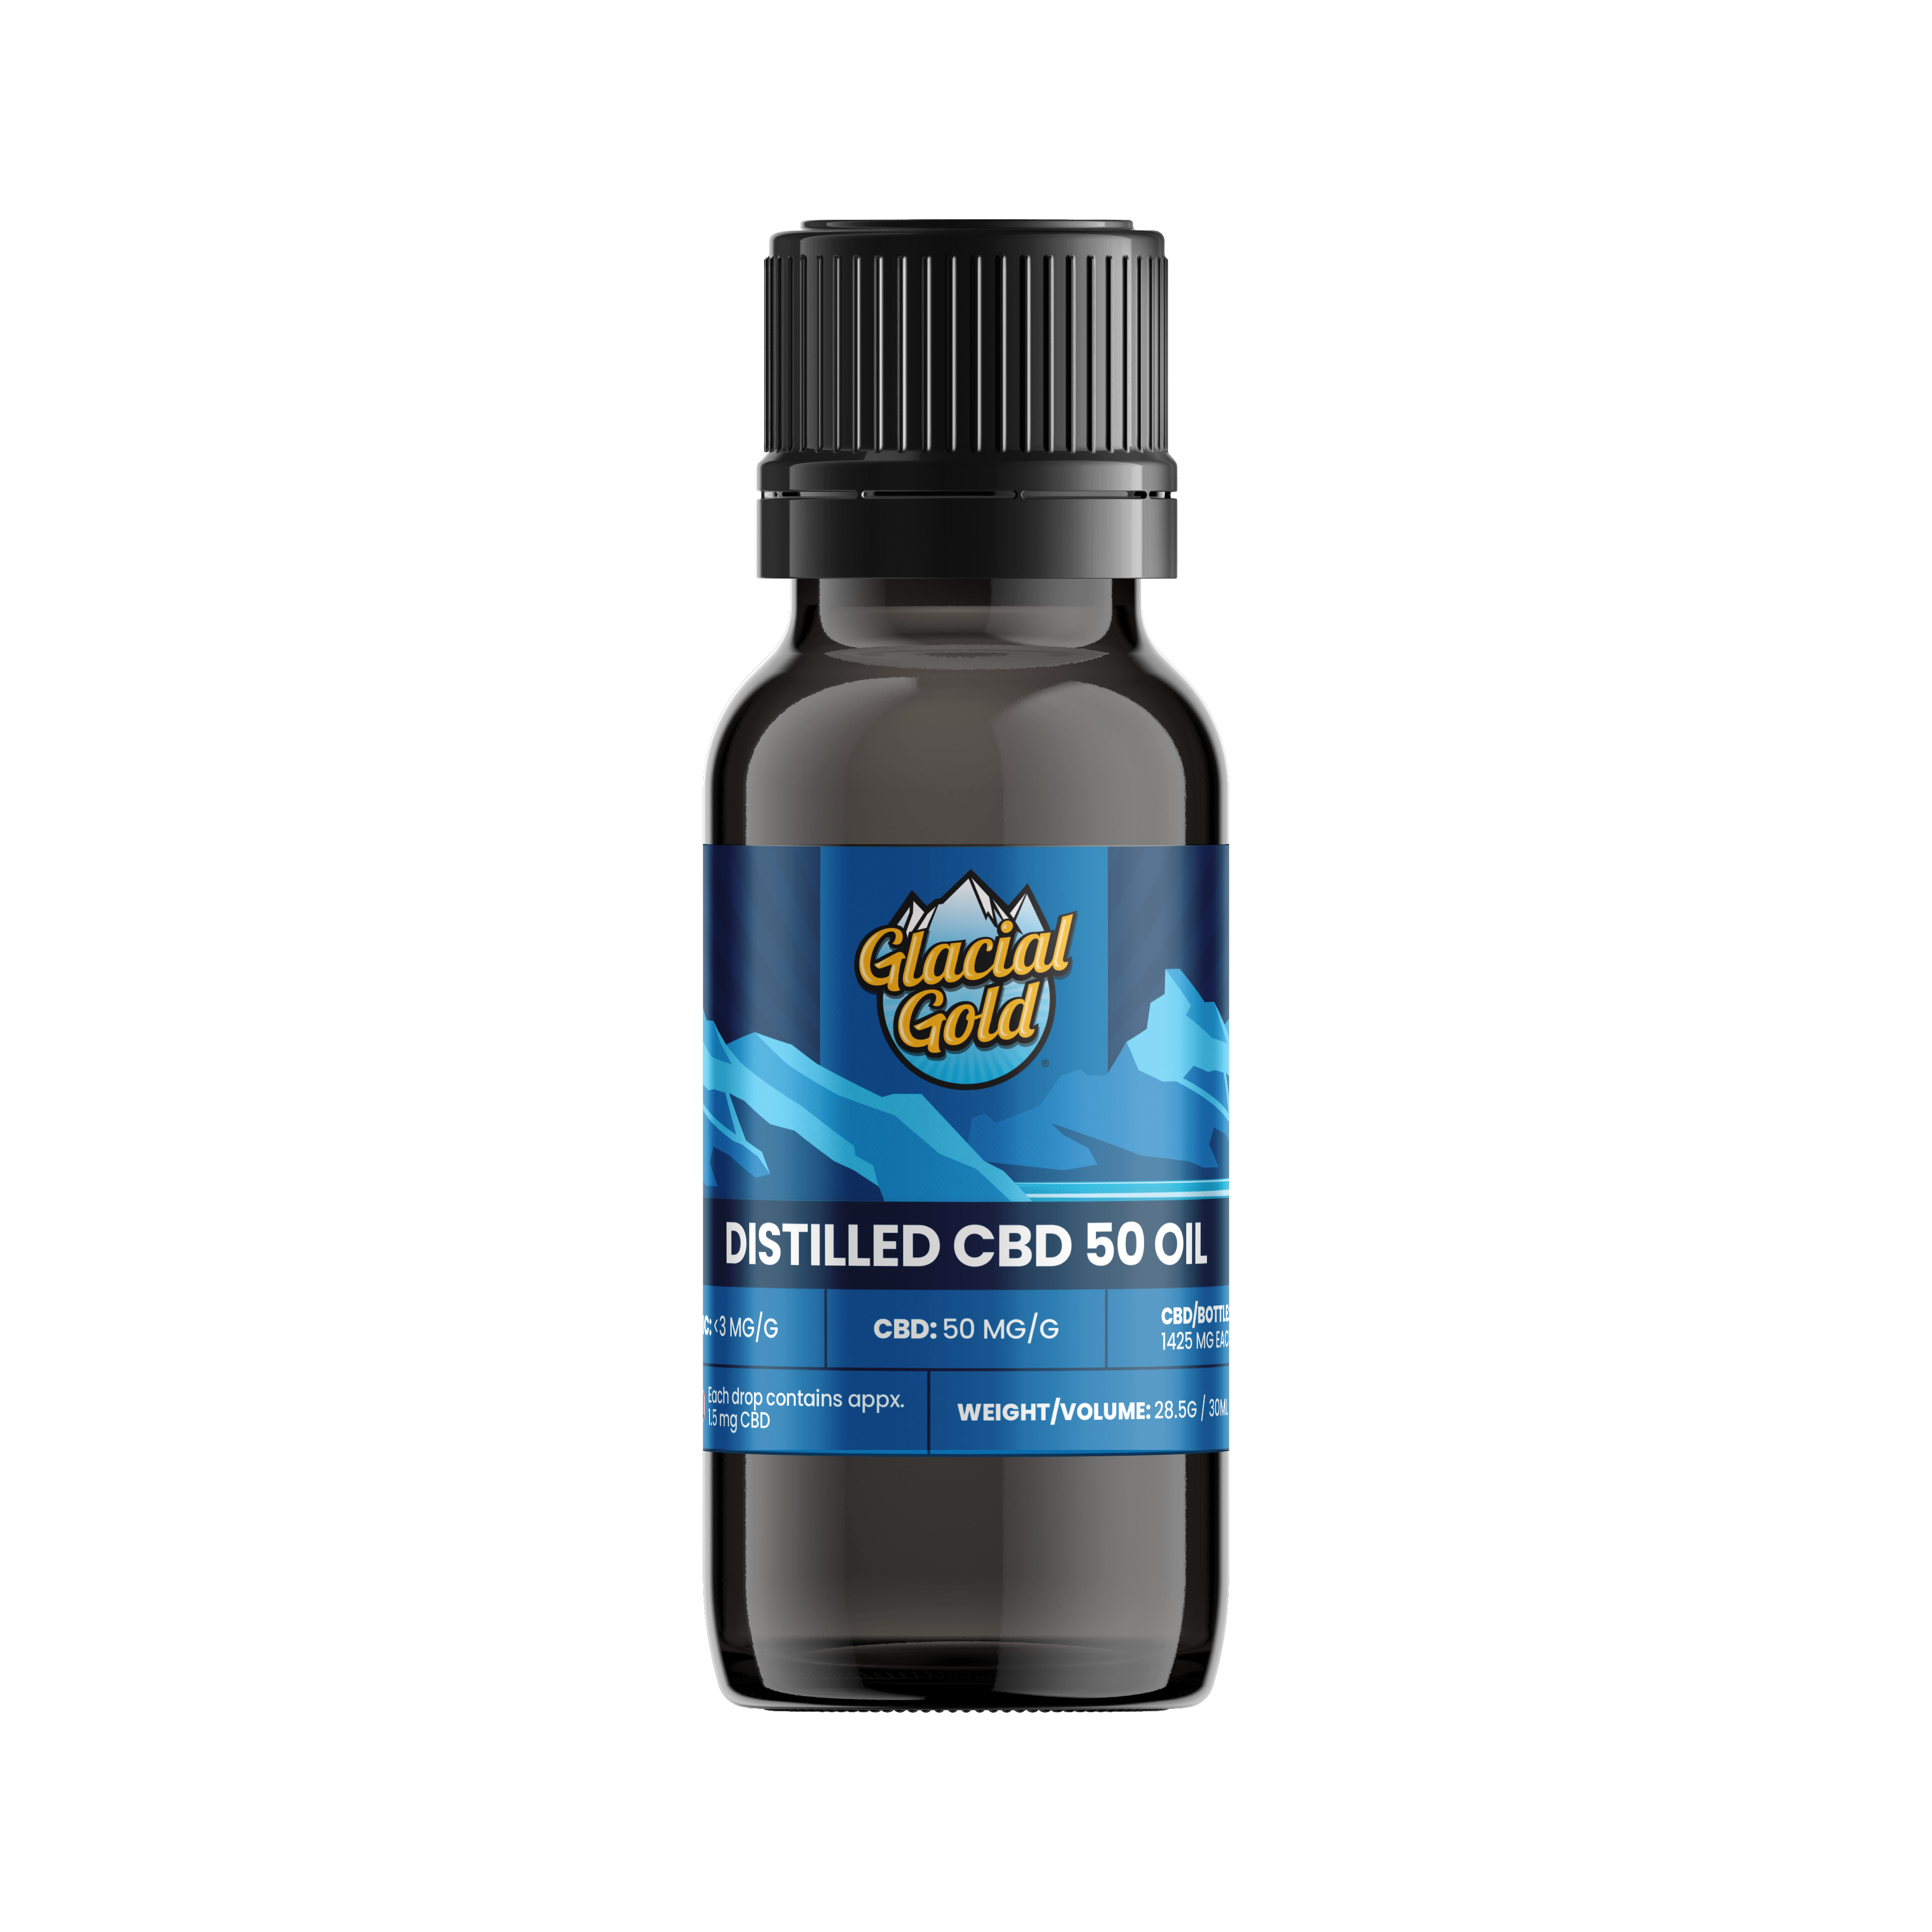 Cannabis Product Glacial Gold - Distilled CBD 50 Oil Drops by Glacial Gold